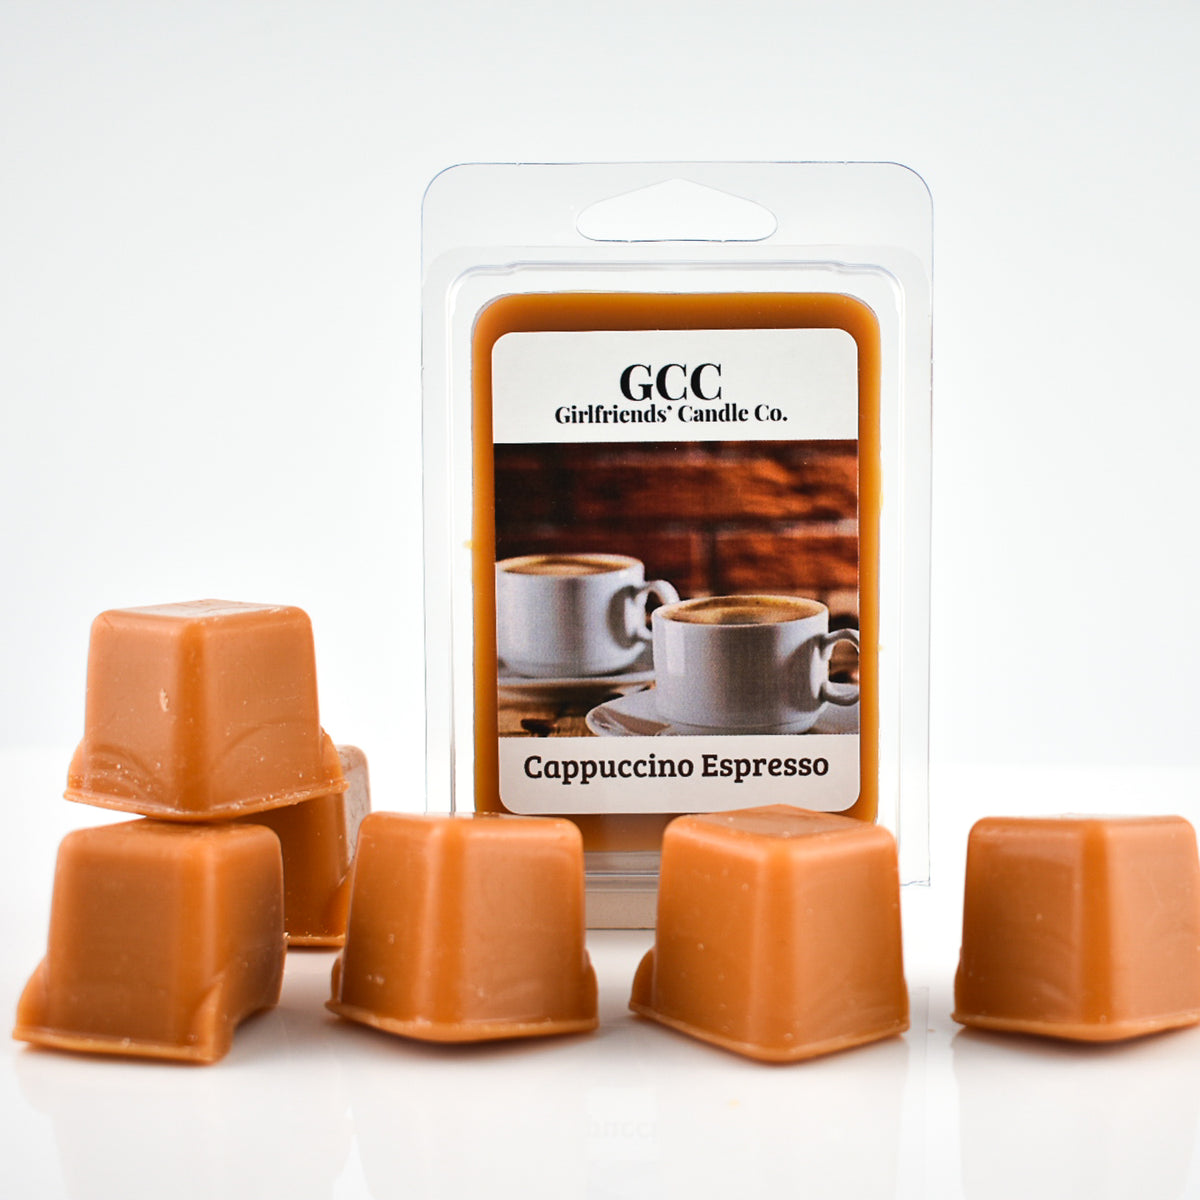 Coffee House Scented Wax Melt